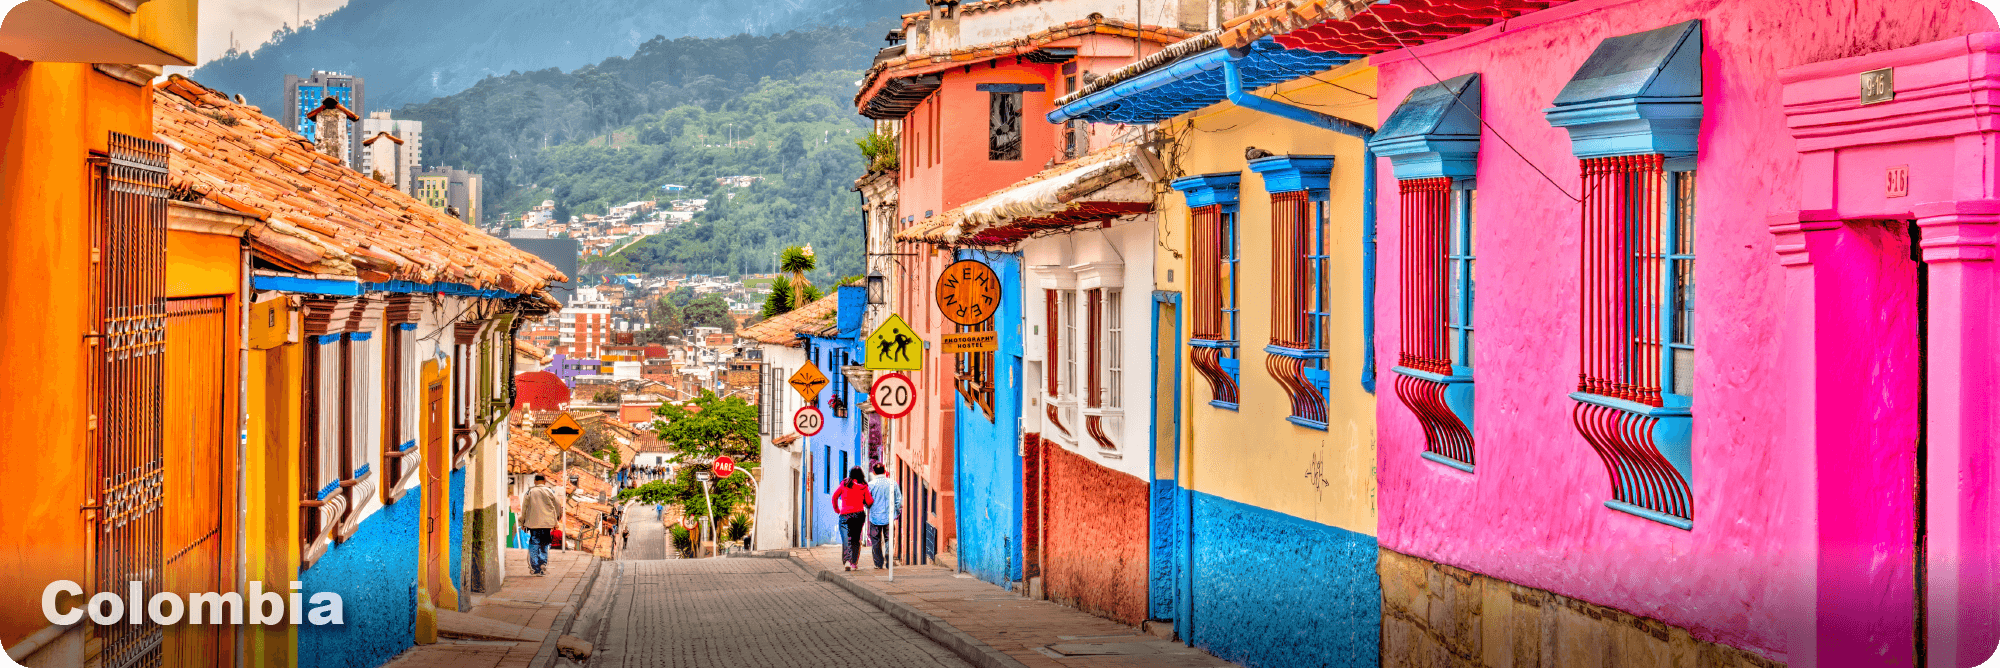 a colourful street in Colombia